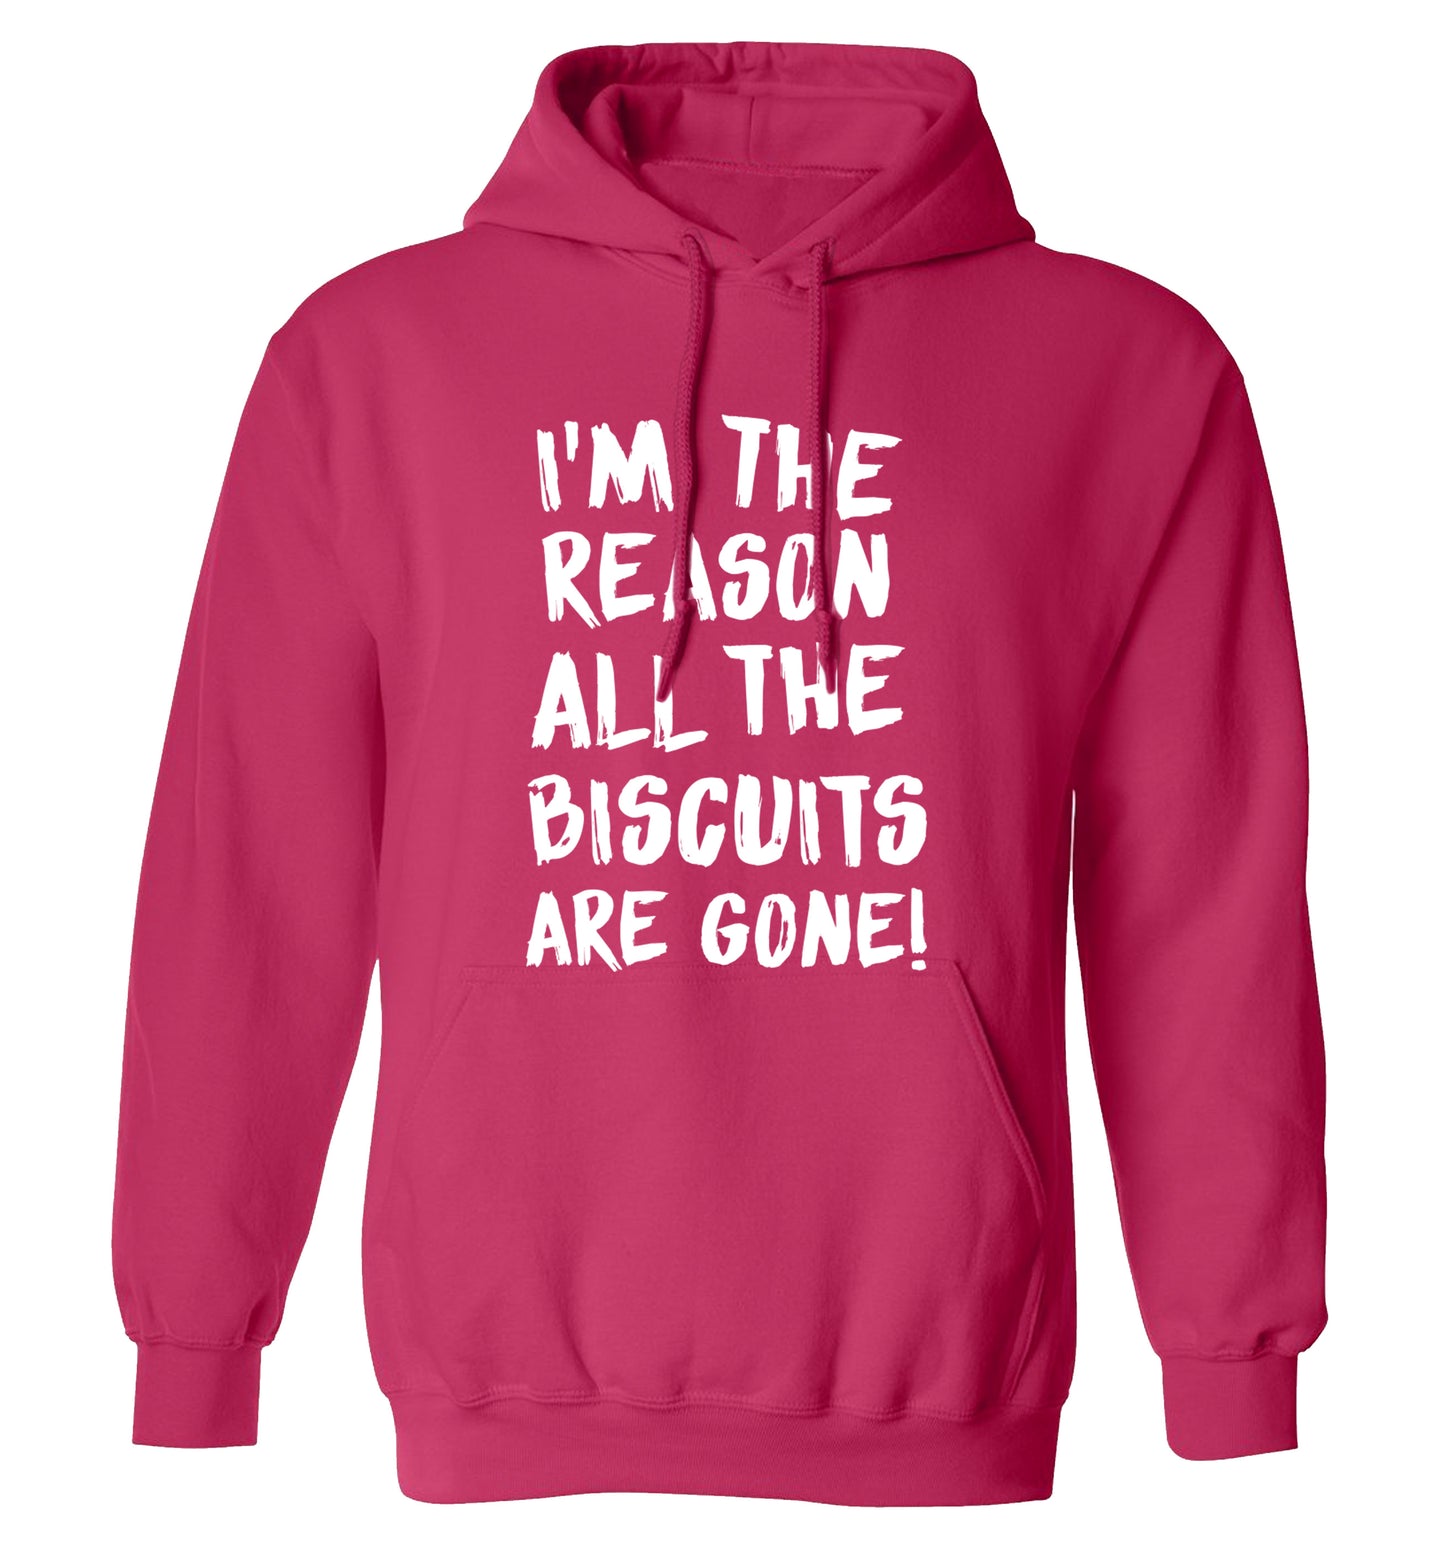 I'm the reason why all the biscuits are gone adults unisex pink hoodie 2XL